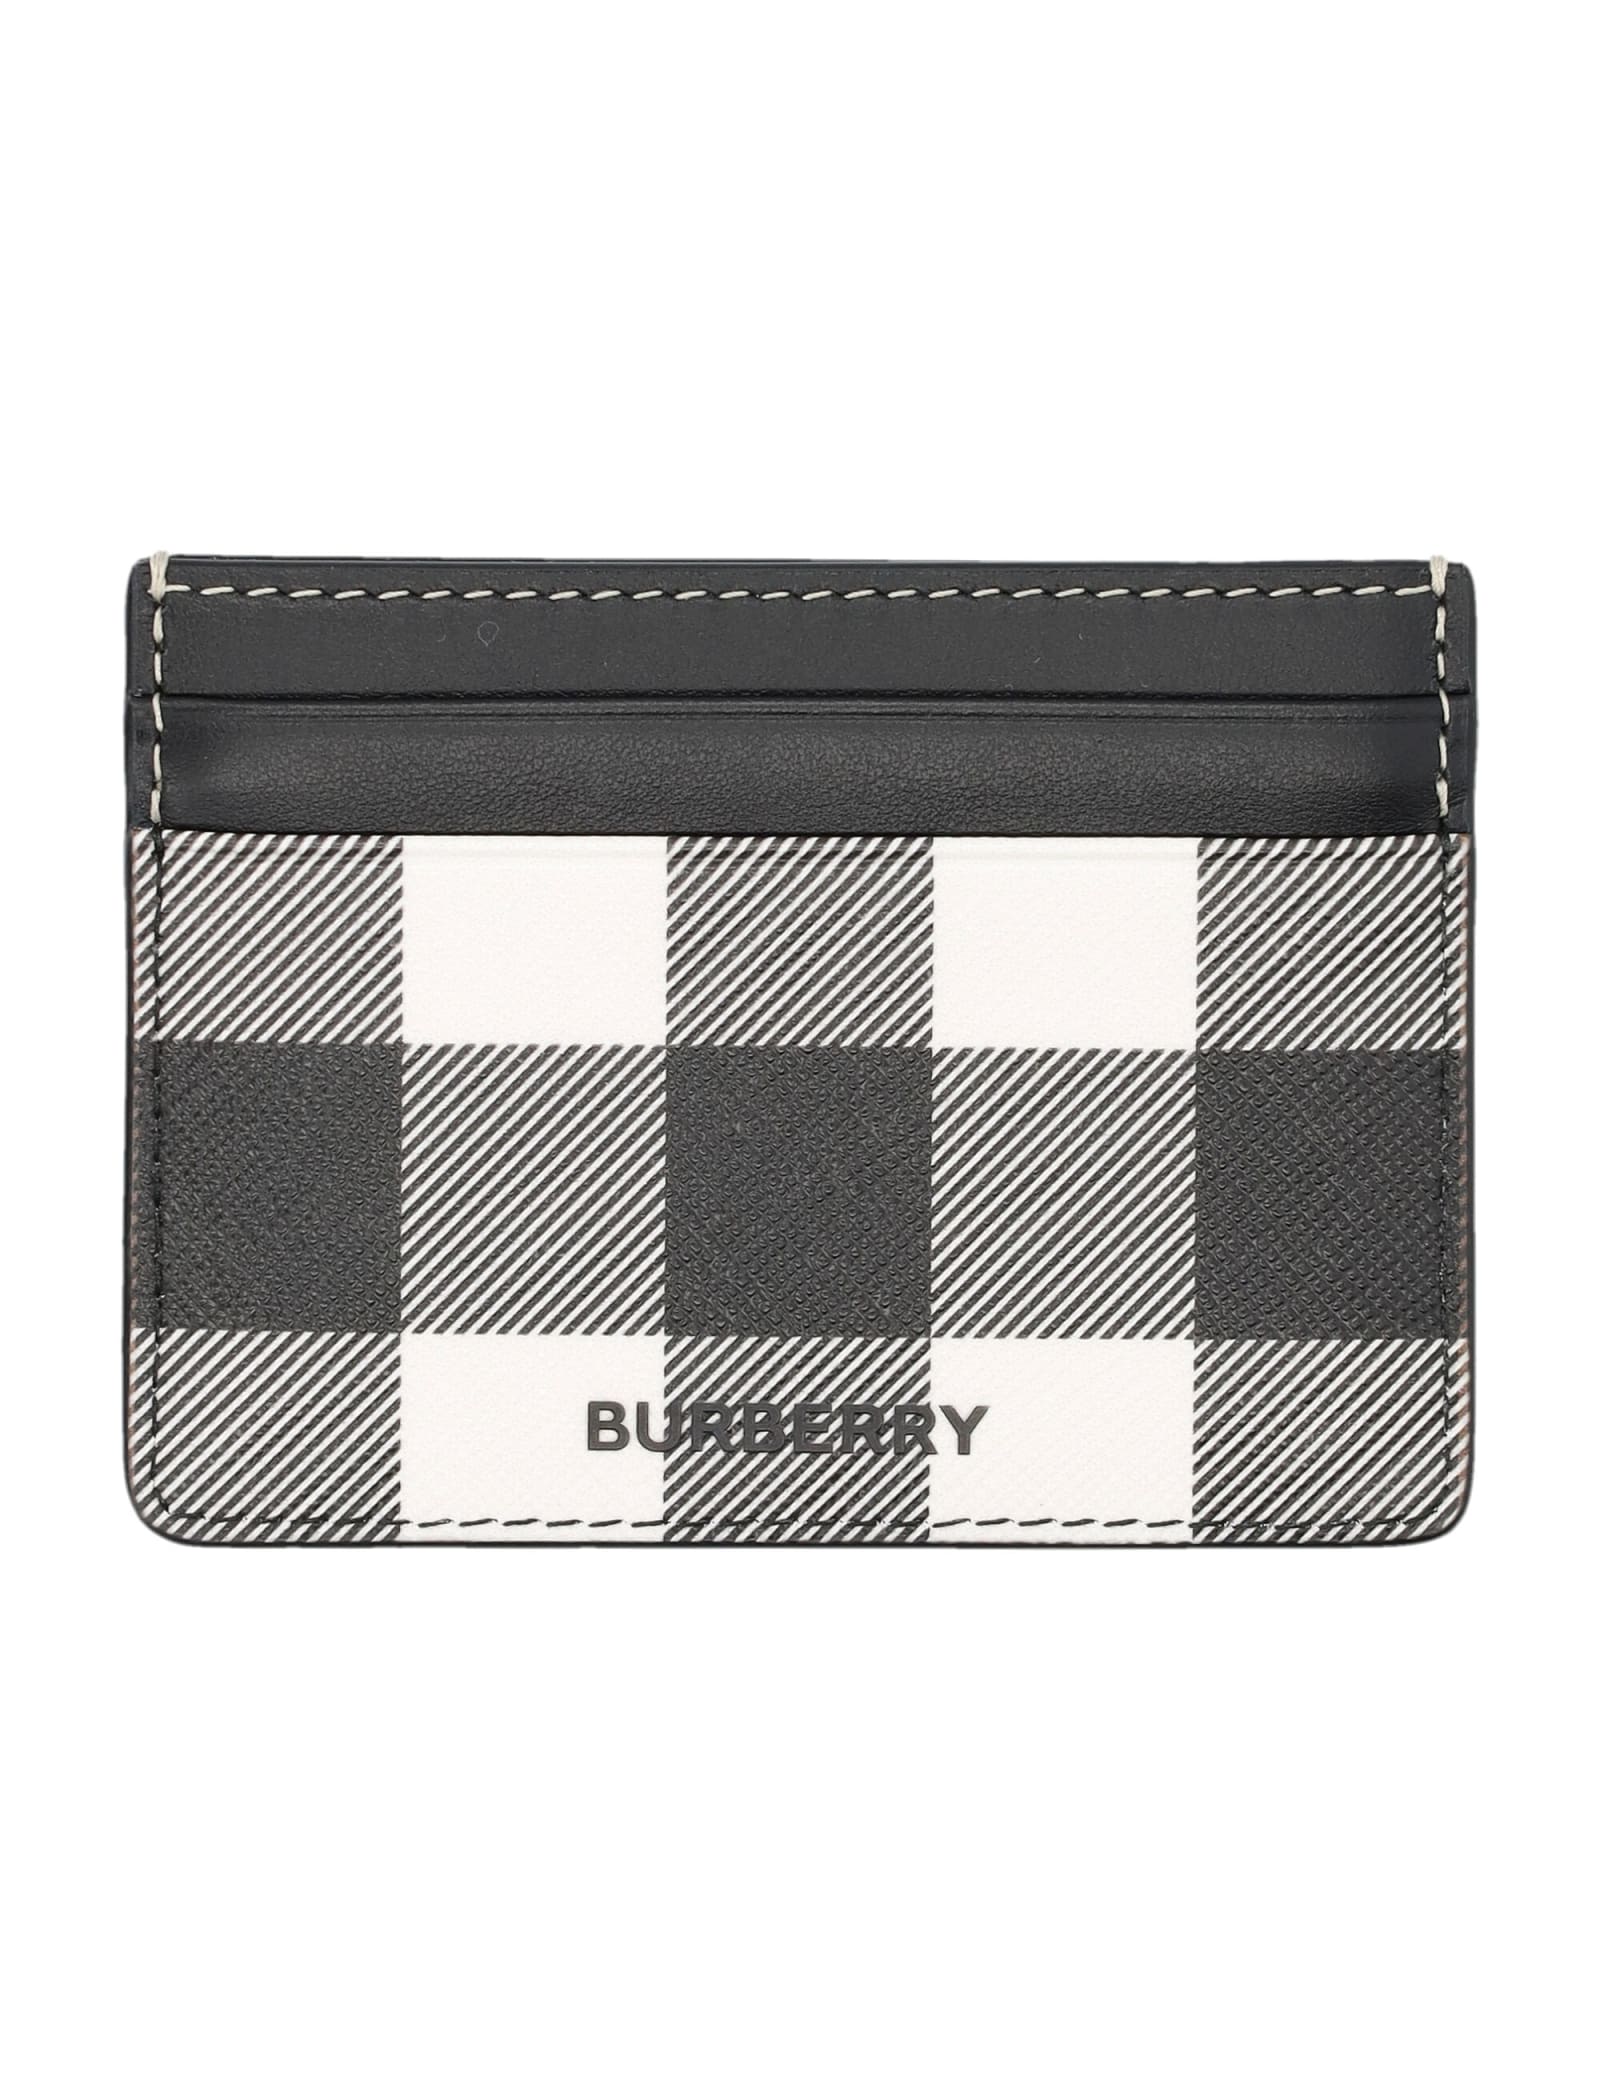 Burberry Check And Leather Card Case In Dark Birch Brown